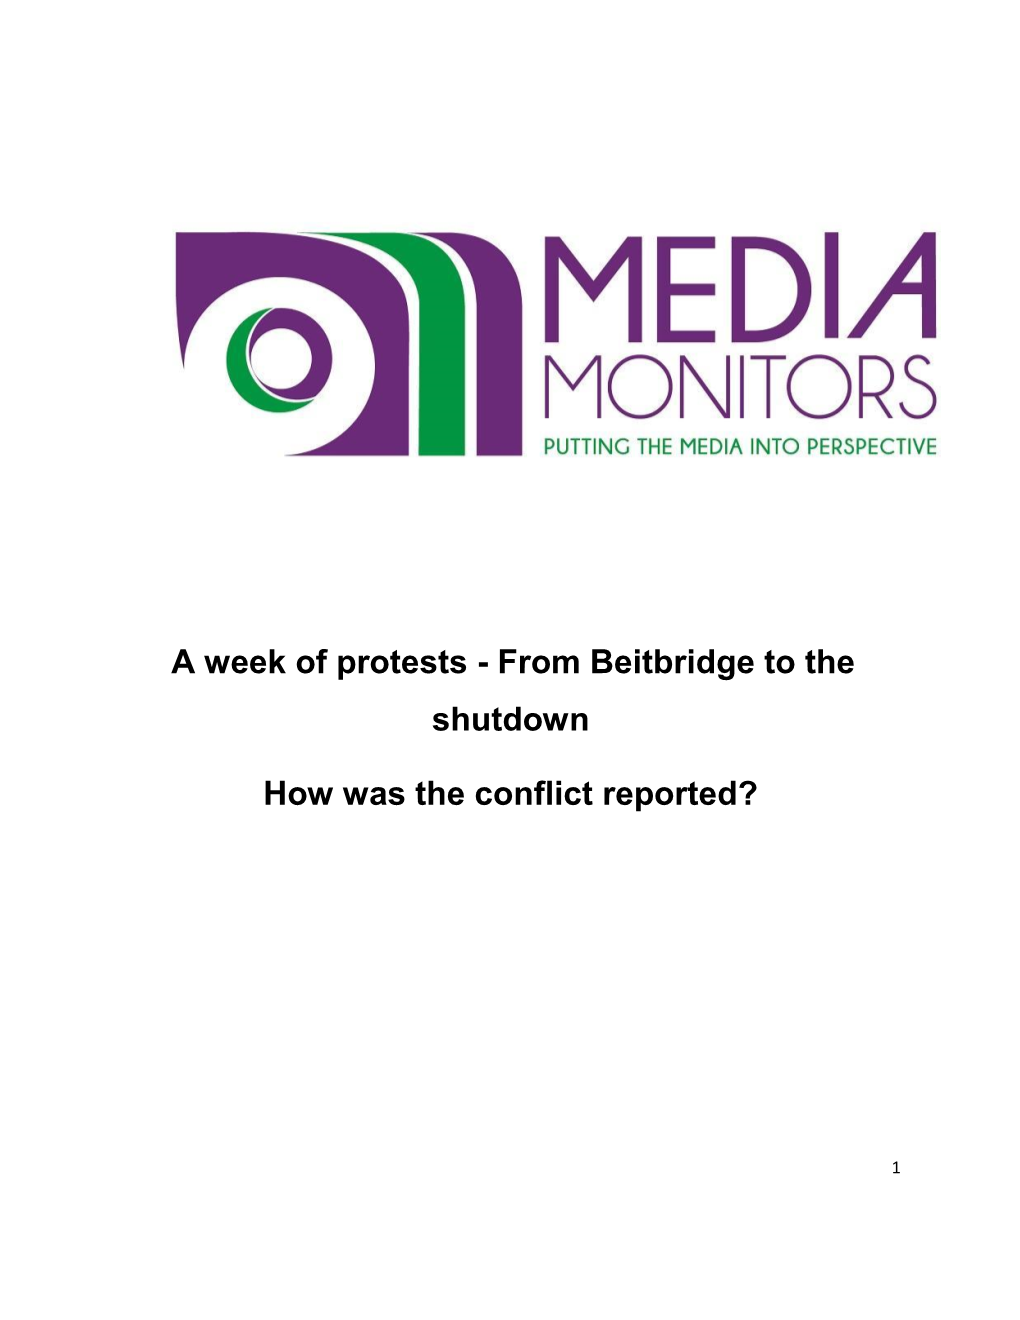 A Week of Protests - from Beitbridge to The